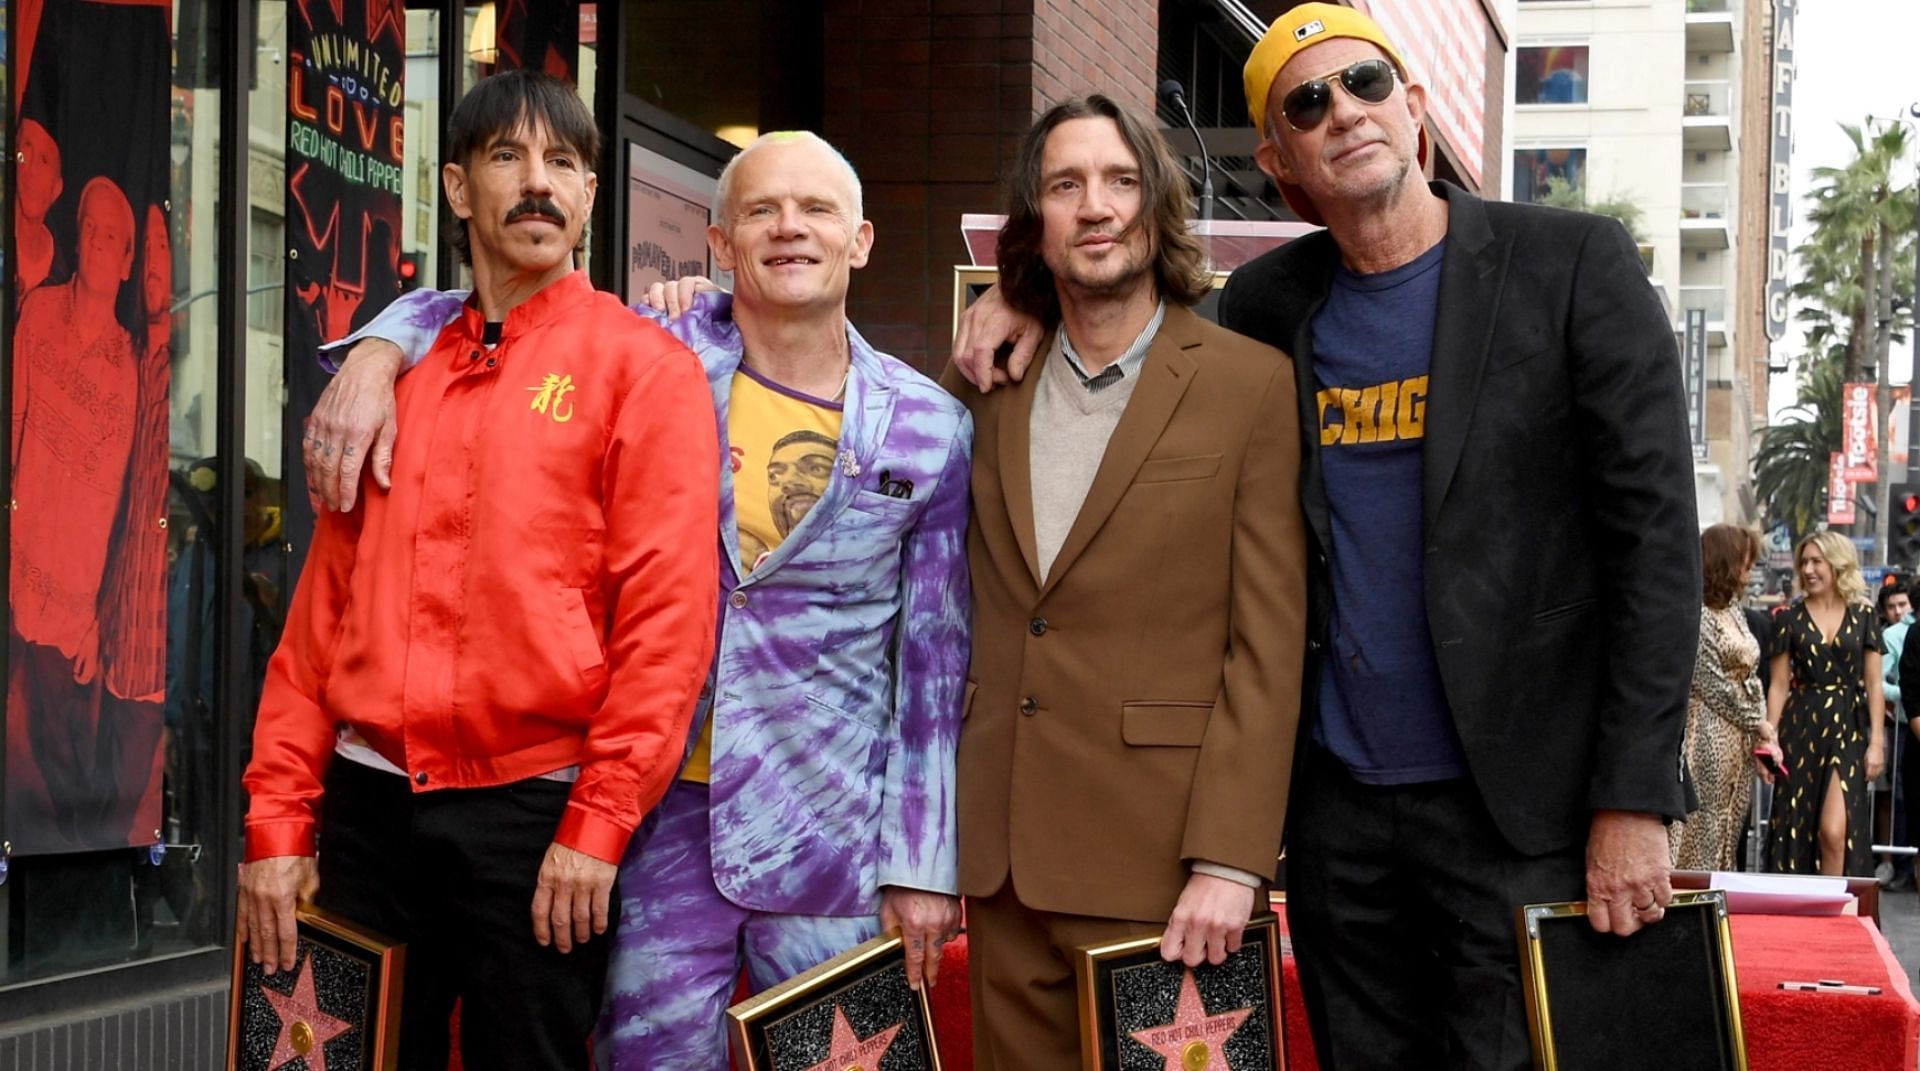 Red Hot Chili Peppers 2023 Tour: Tickets, presale, dates, venues, and more